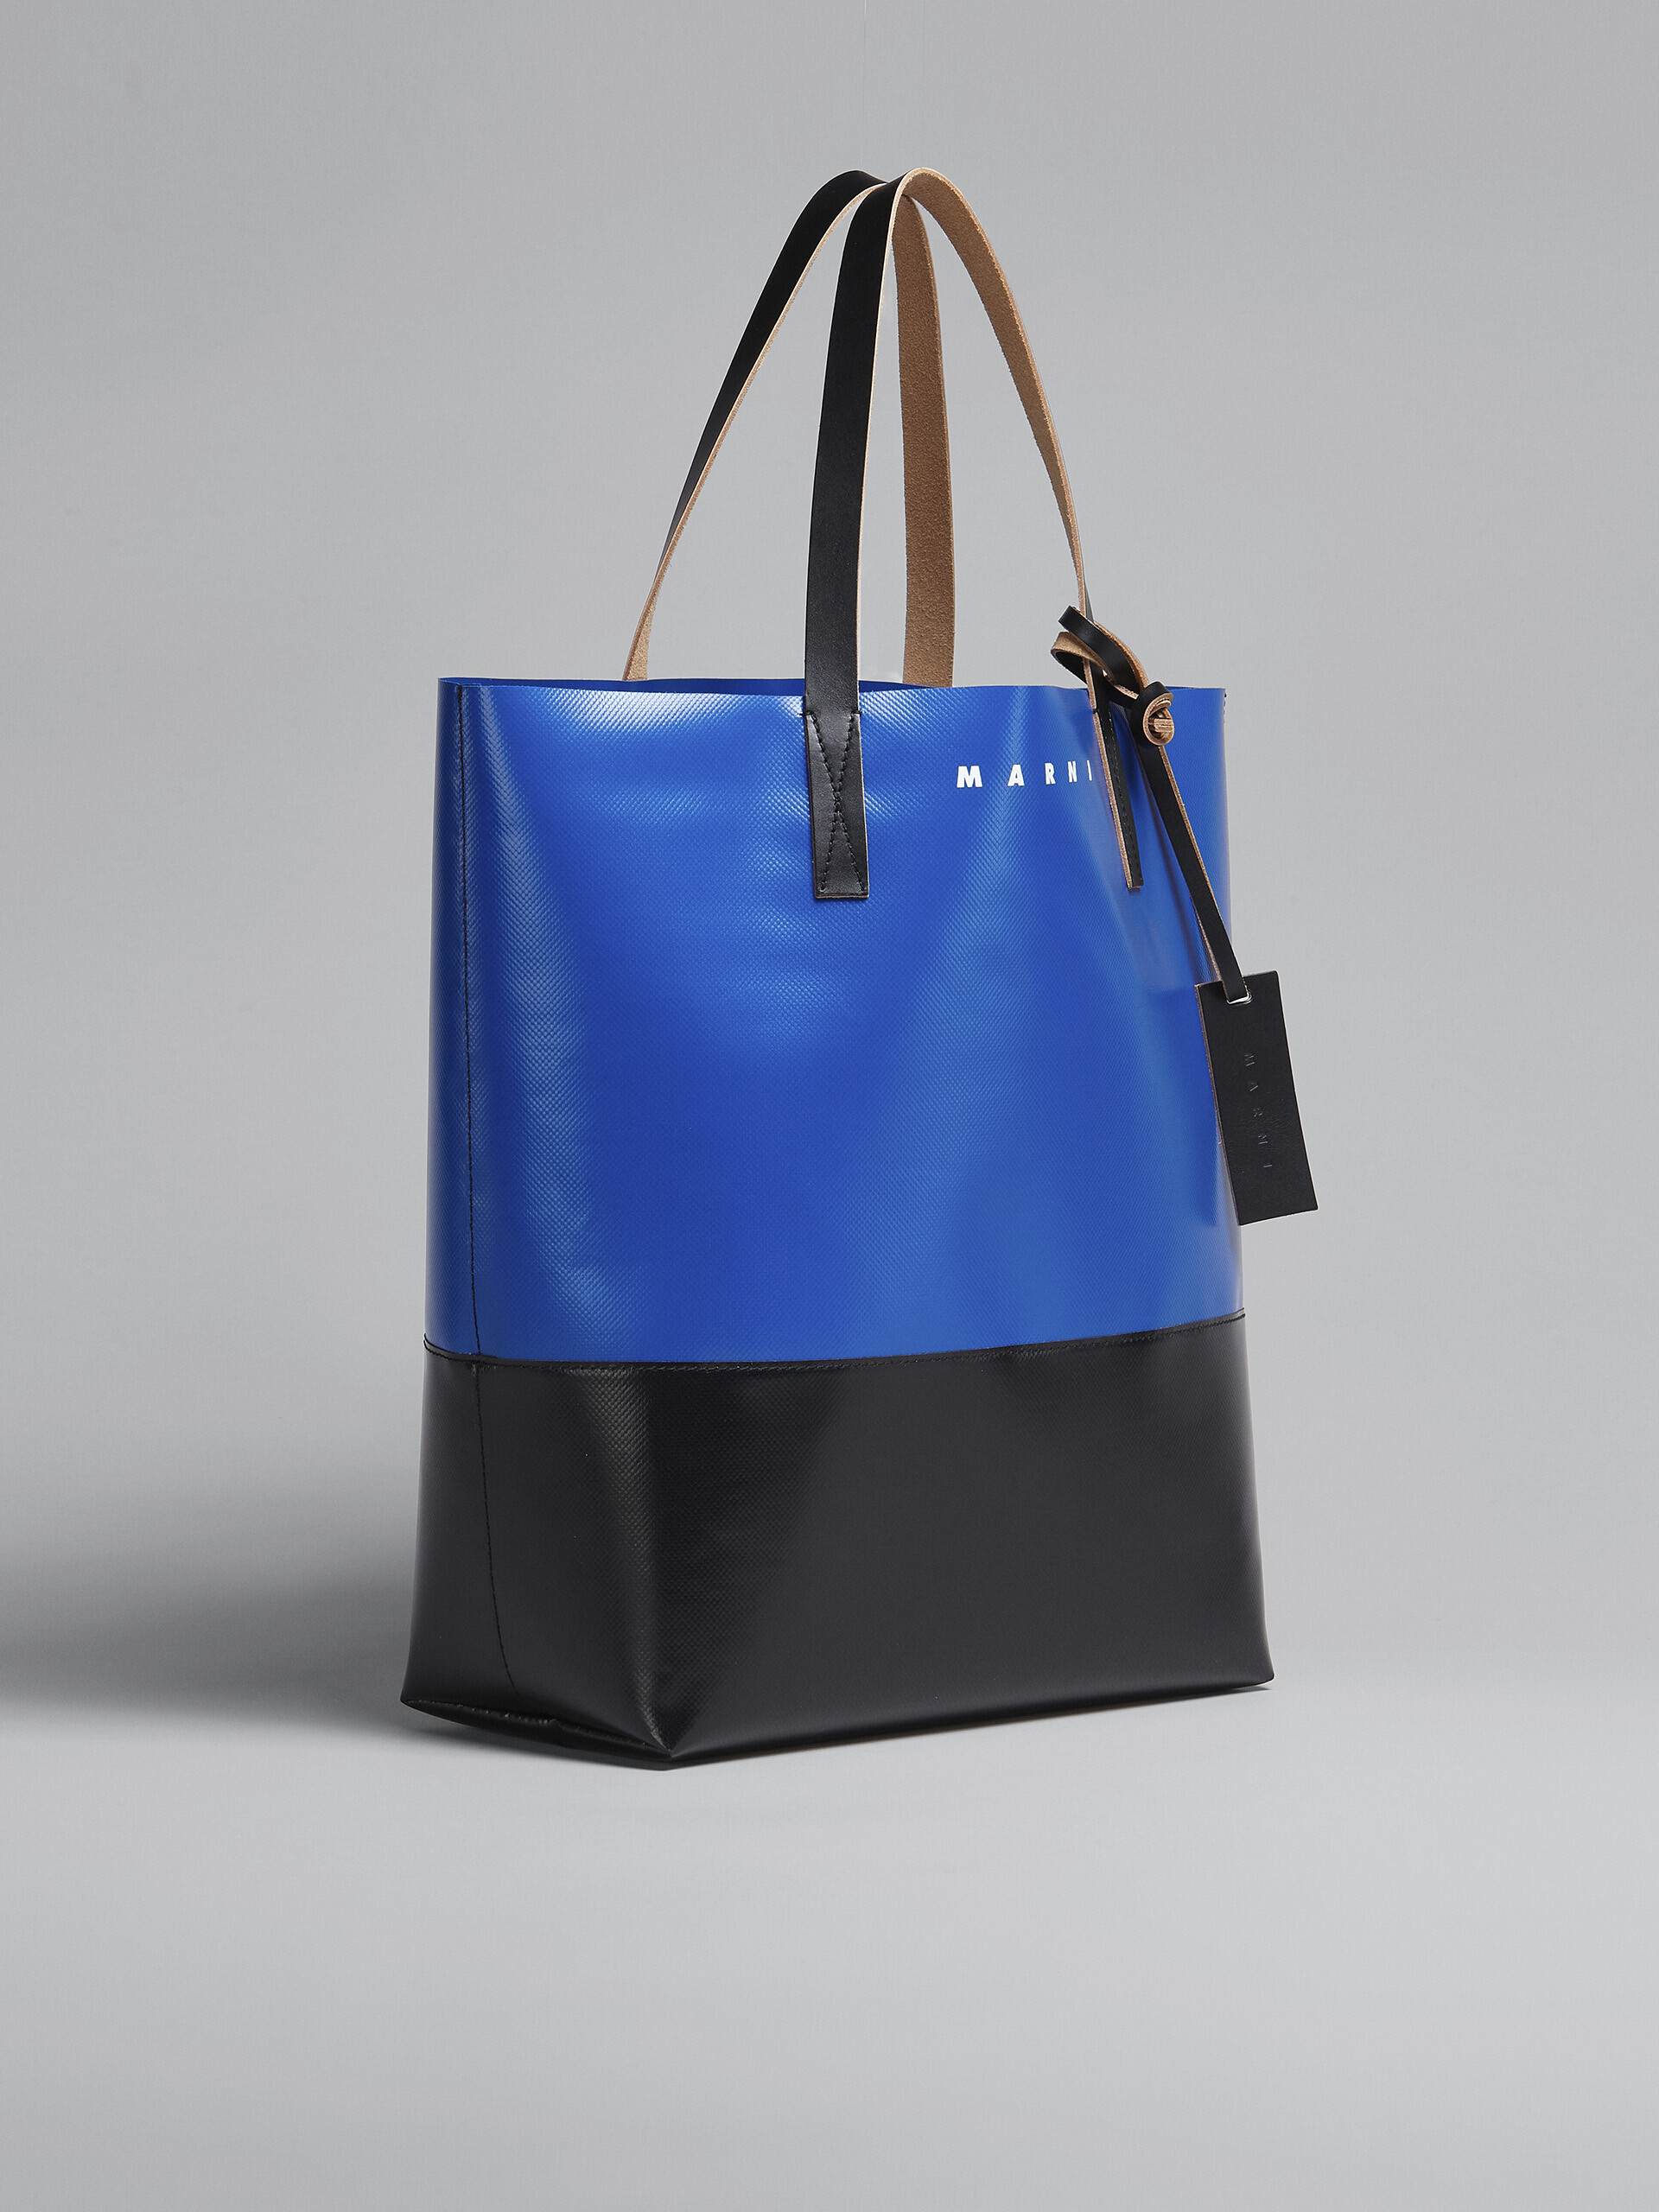 Blue and black TRIBECA shopping bag - Shopping Bags - Image 6